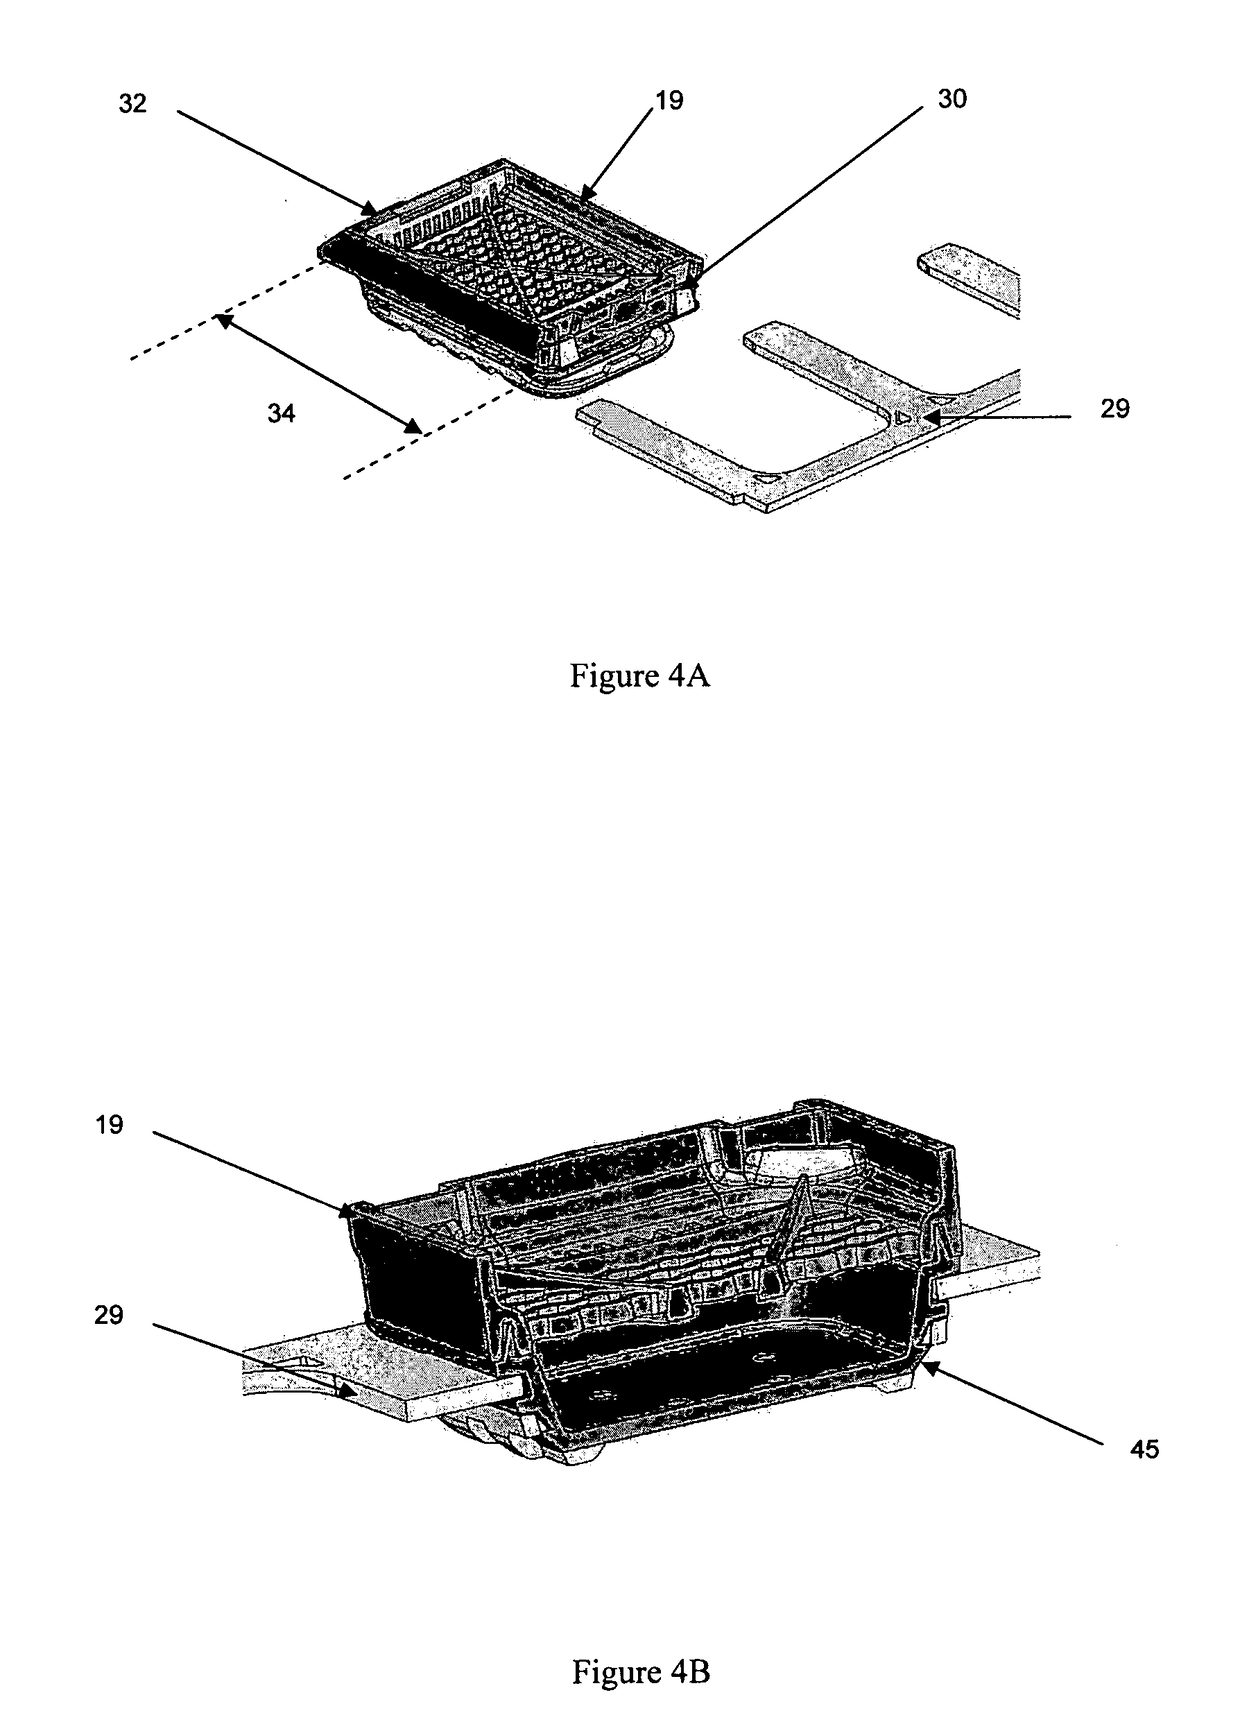 Device and method for tissue handling and embedding